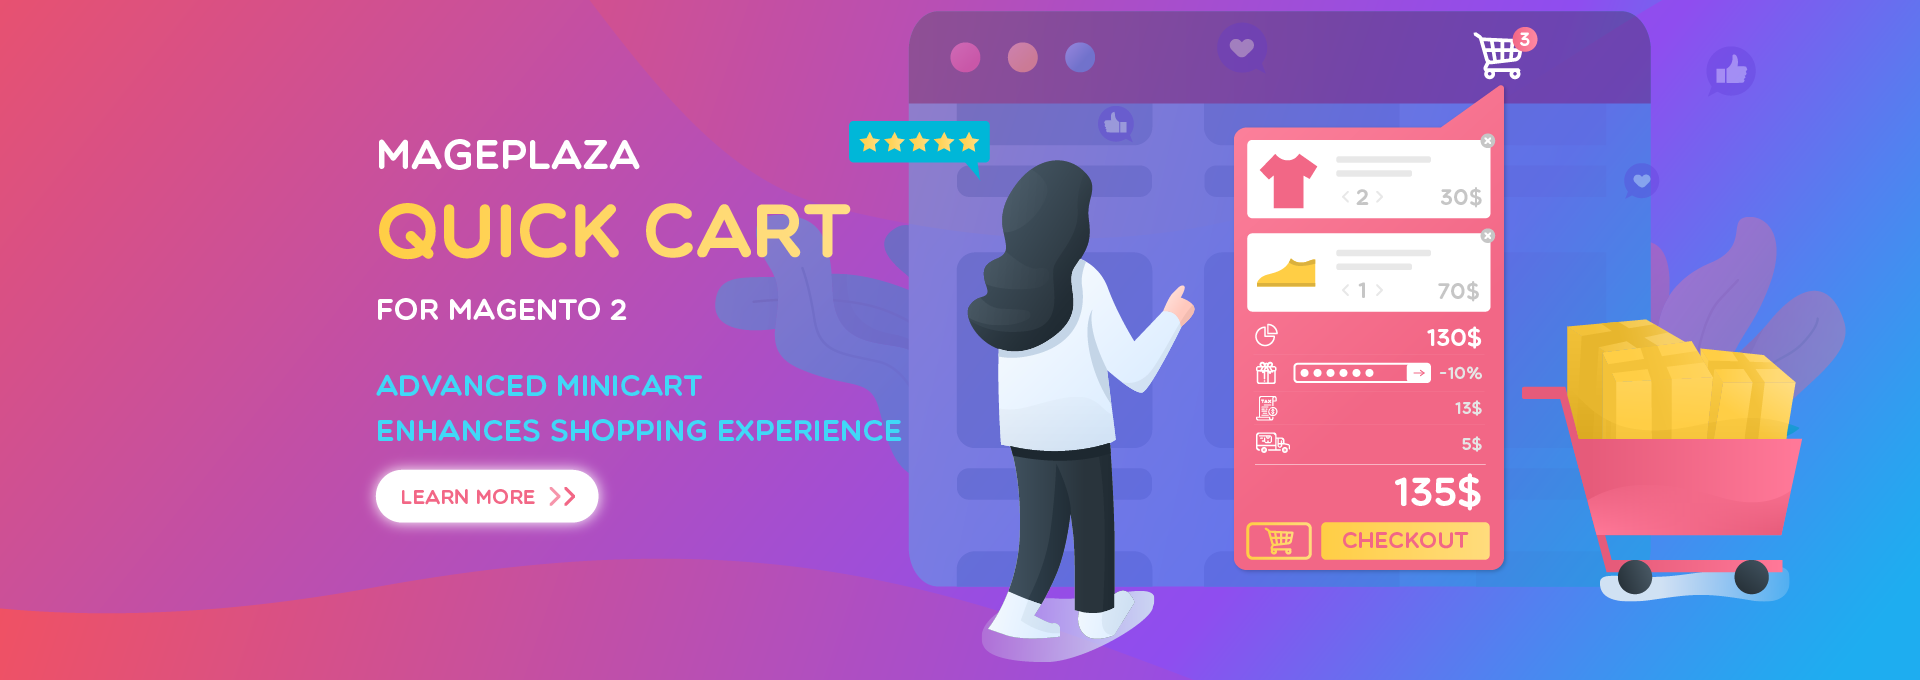 How to Customize Minicart using Magento 2 Minicart extension – Mageplaza